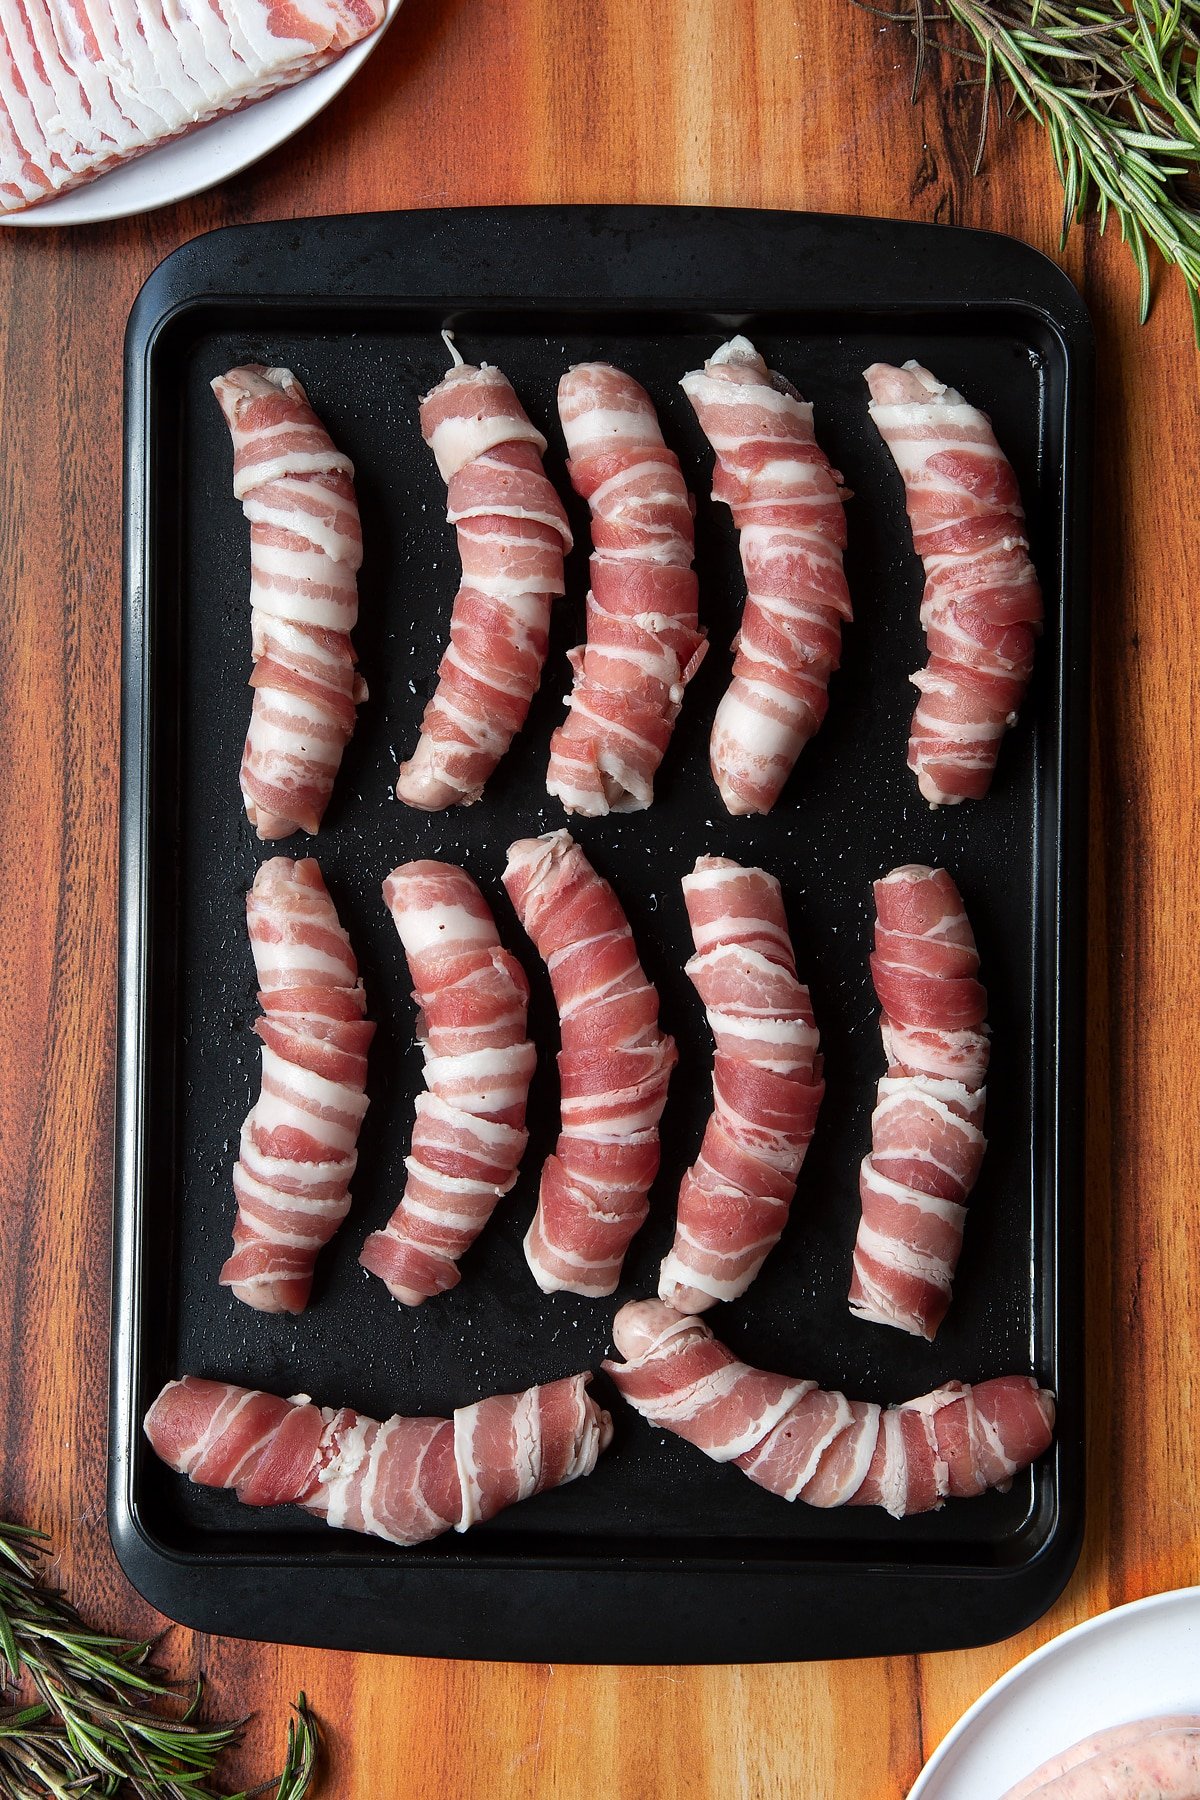 Overhead shot of bacon-wrapped sausages in black tray